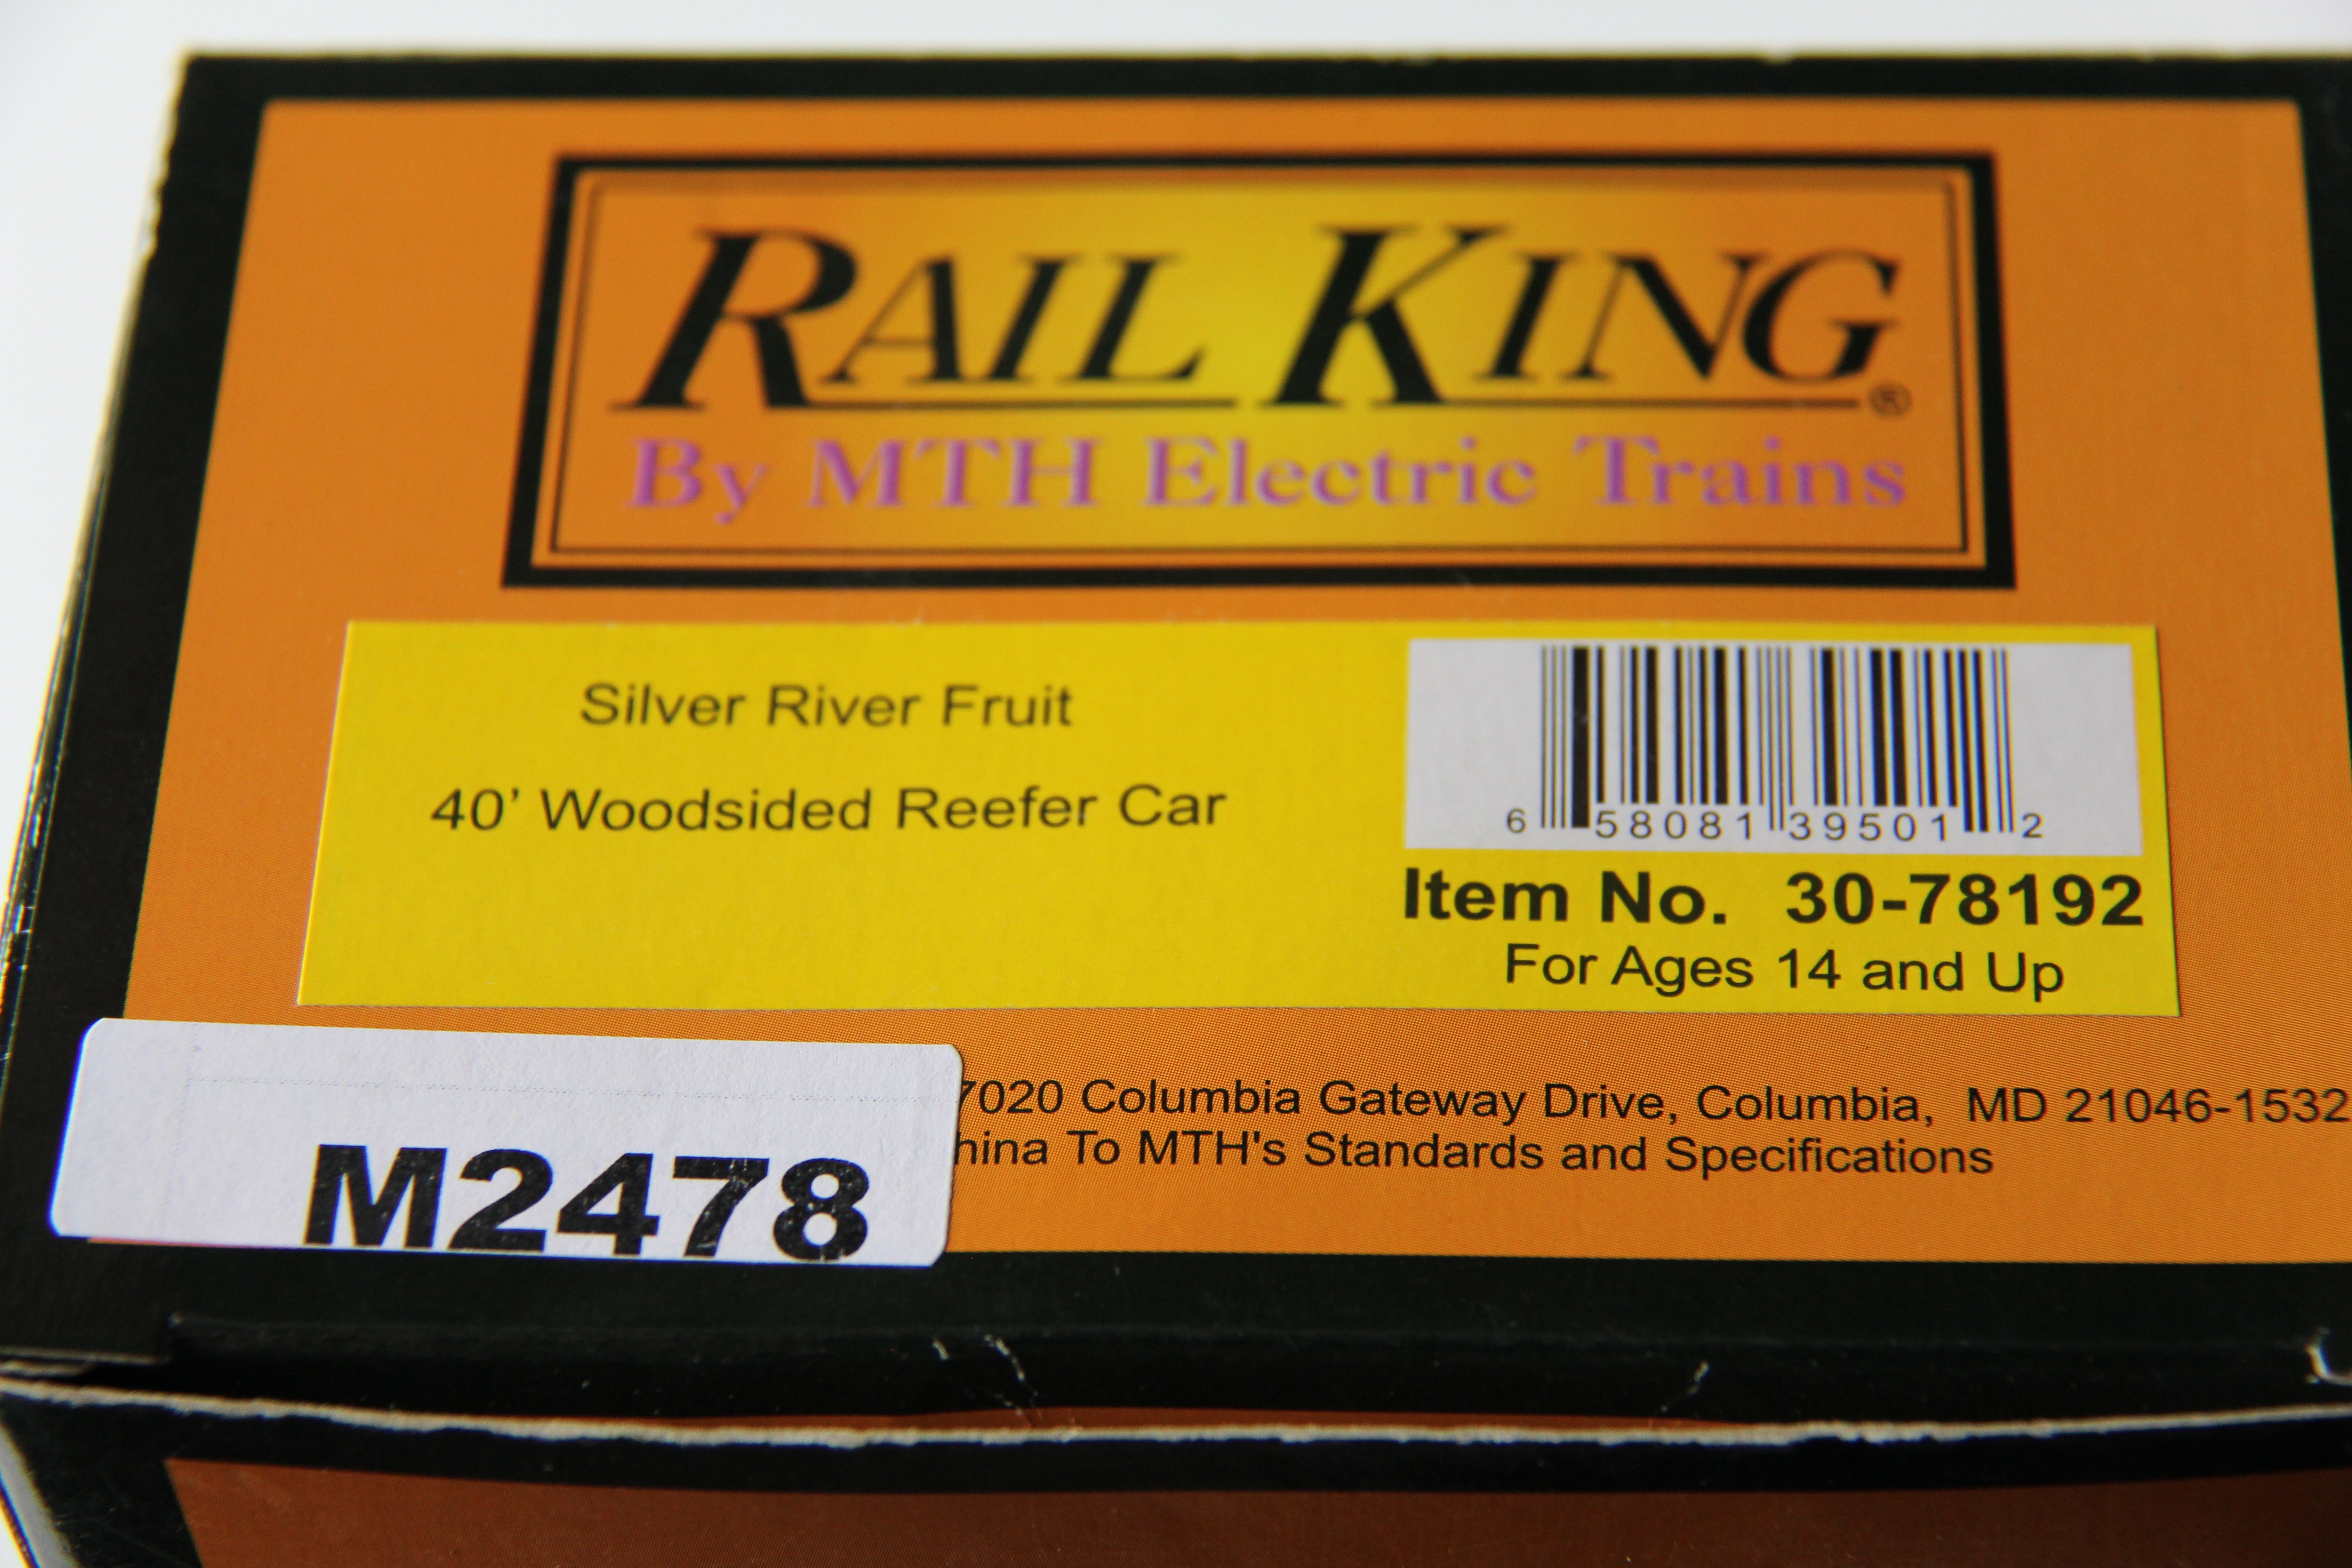 Rail King 30-78192 -Silver River Fruit 40' Woodsided Reefer Car-Second hand-M2478